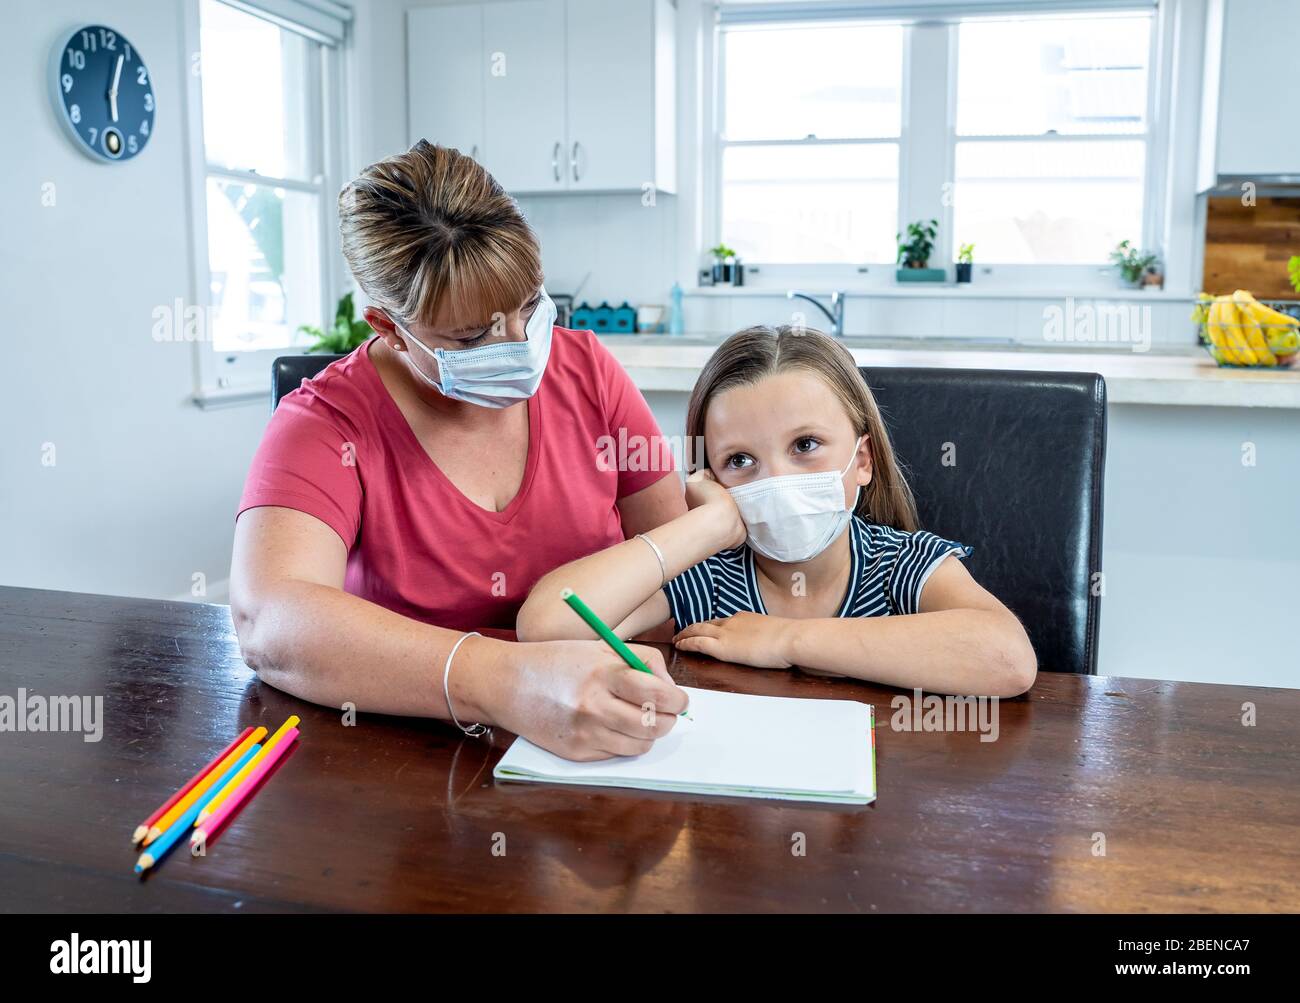 Coronavirus Outbreak. Lockdown and school closures. Mother helping bored daughter with face mask studying online classes at home. COVID-19 pandemic fo Stock Photo